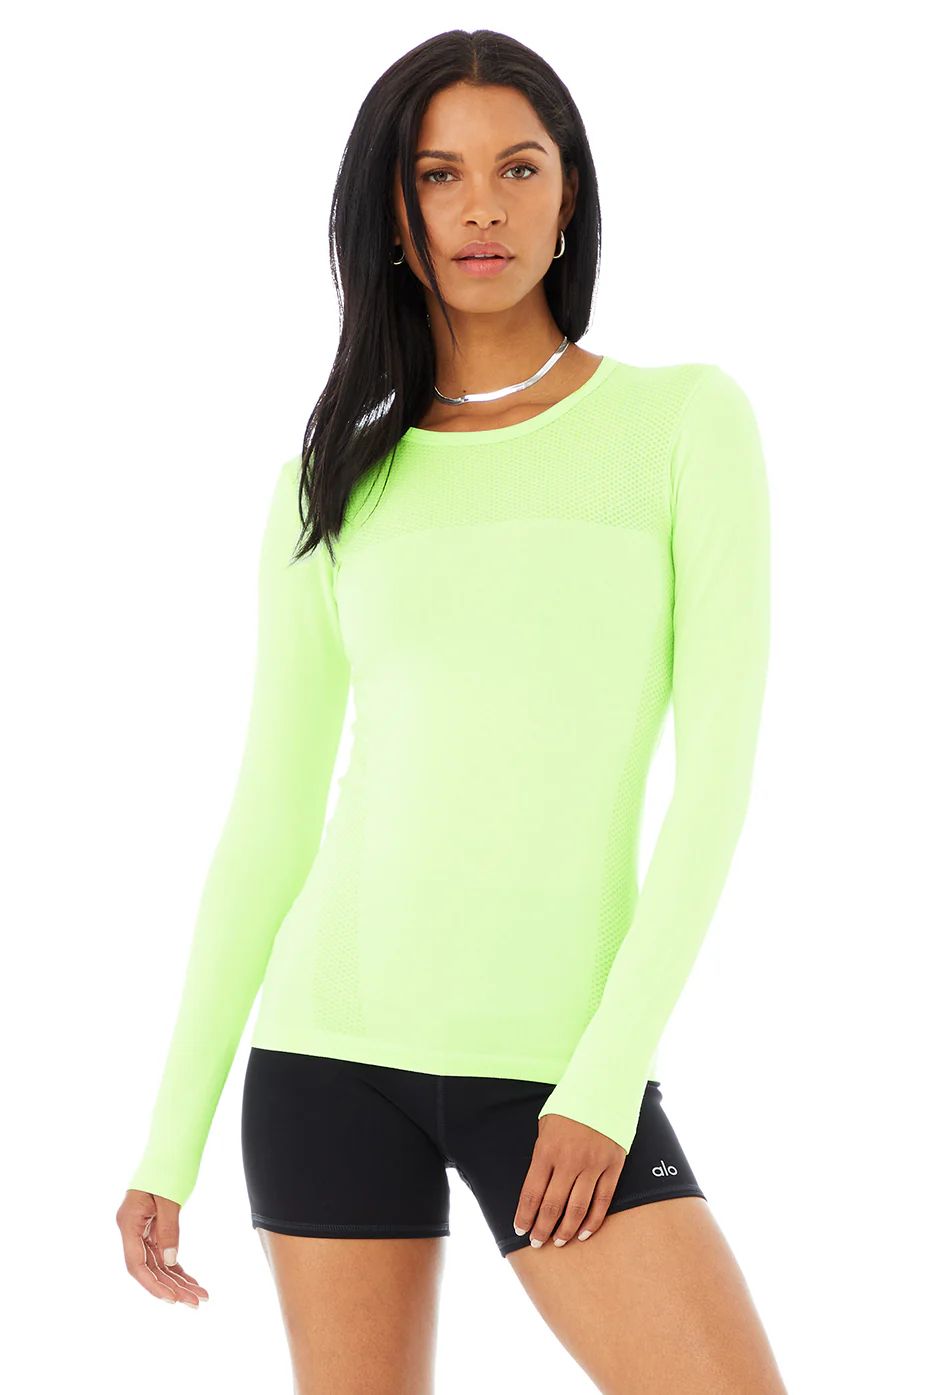 Seamless Essential Long Sleeve Top in Neon Lime, Size: Large | Alo YogaÂ® | Alo Yoga